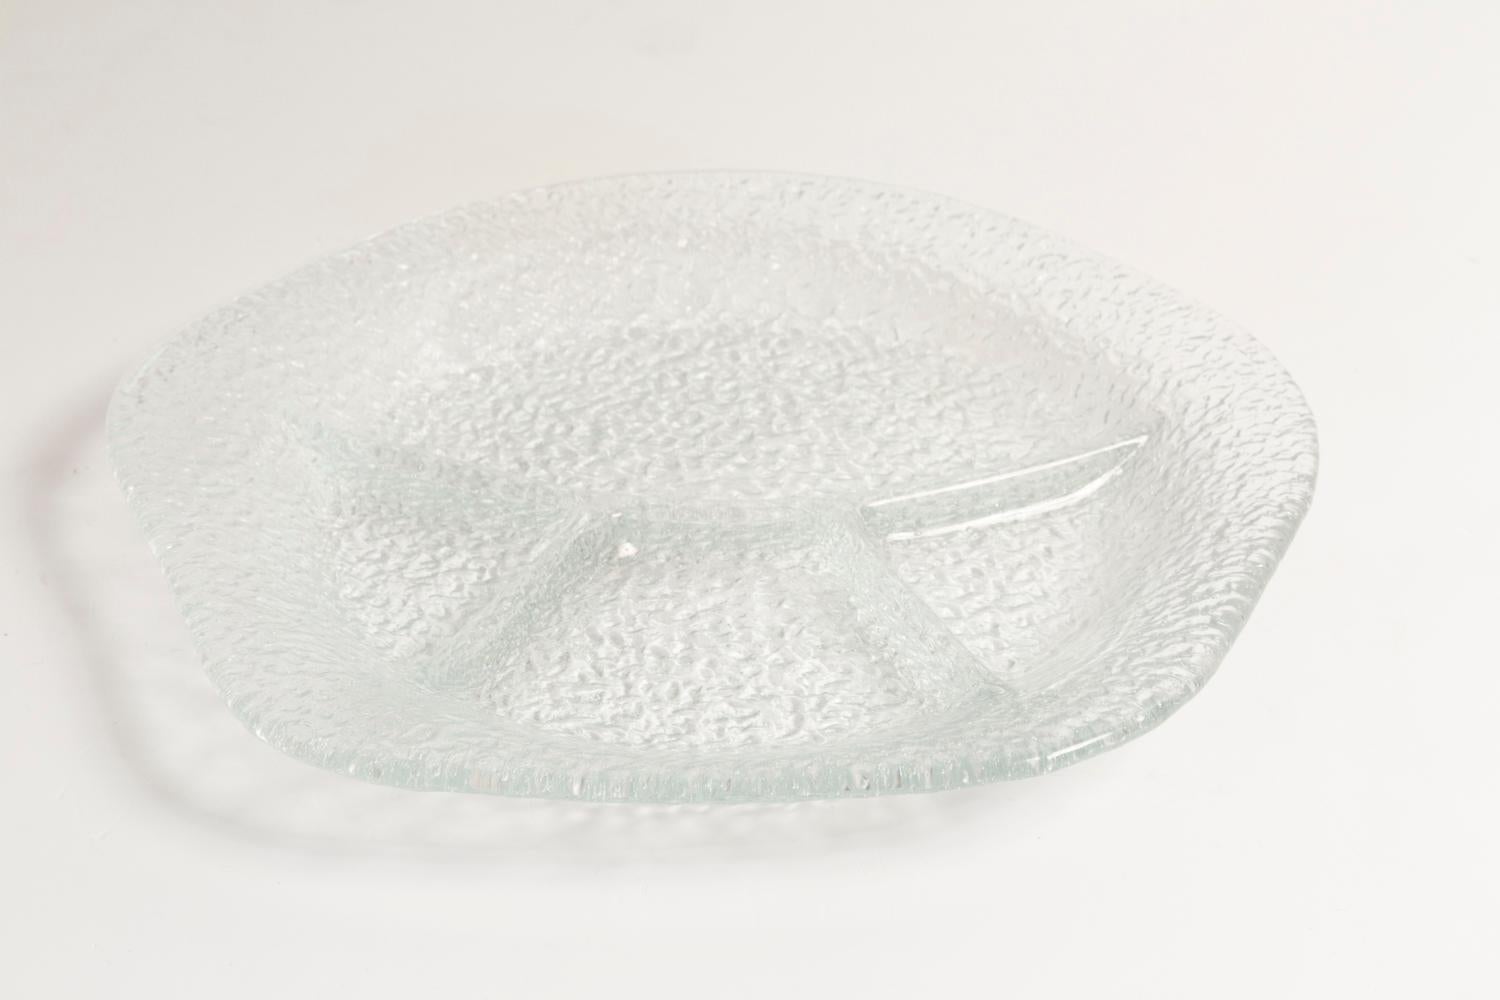 Ceramic Midcentury Vintage Decorative Glass Plate, Italy, 1960s For Sale